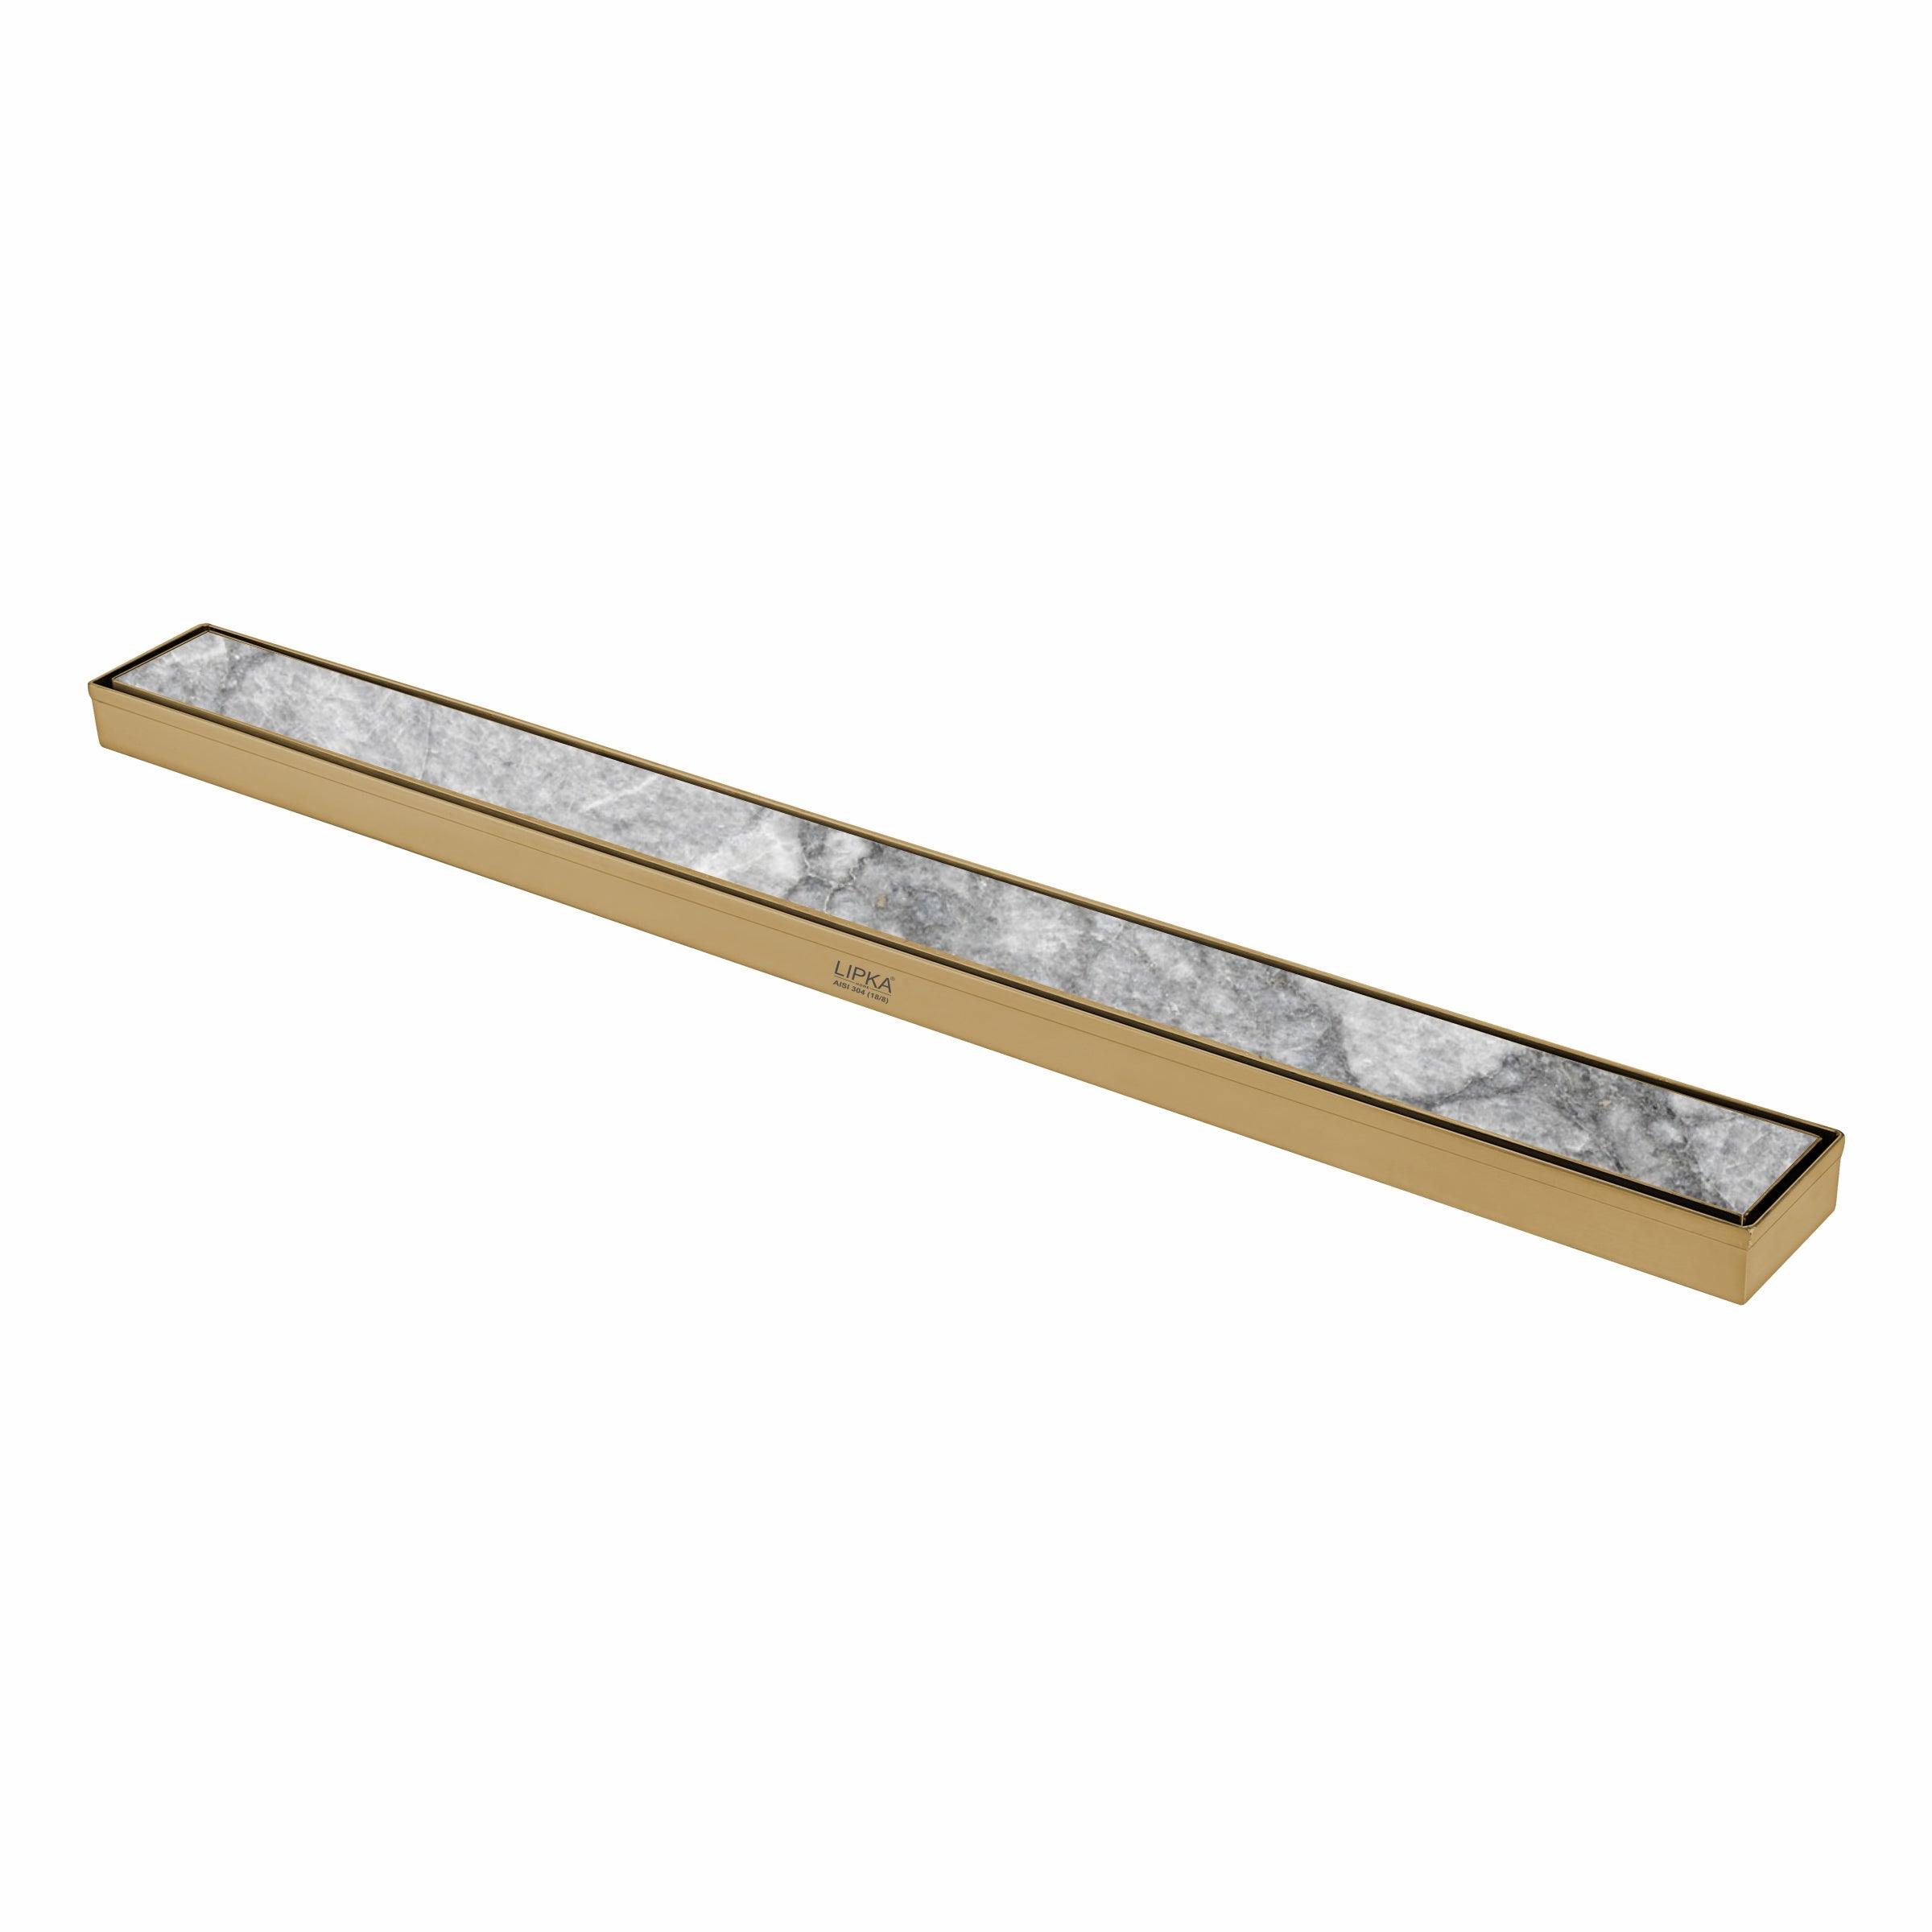 Marble Insert Shower Drain Channel - Yellow Gold (32 x 2 Inches)